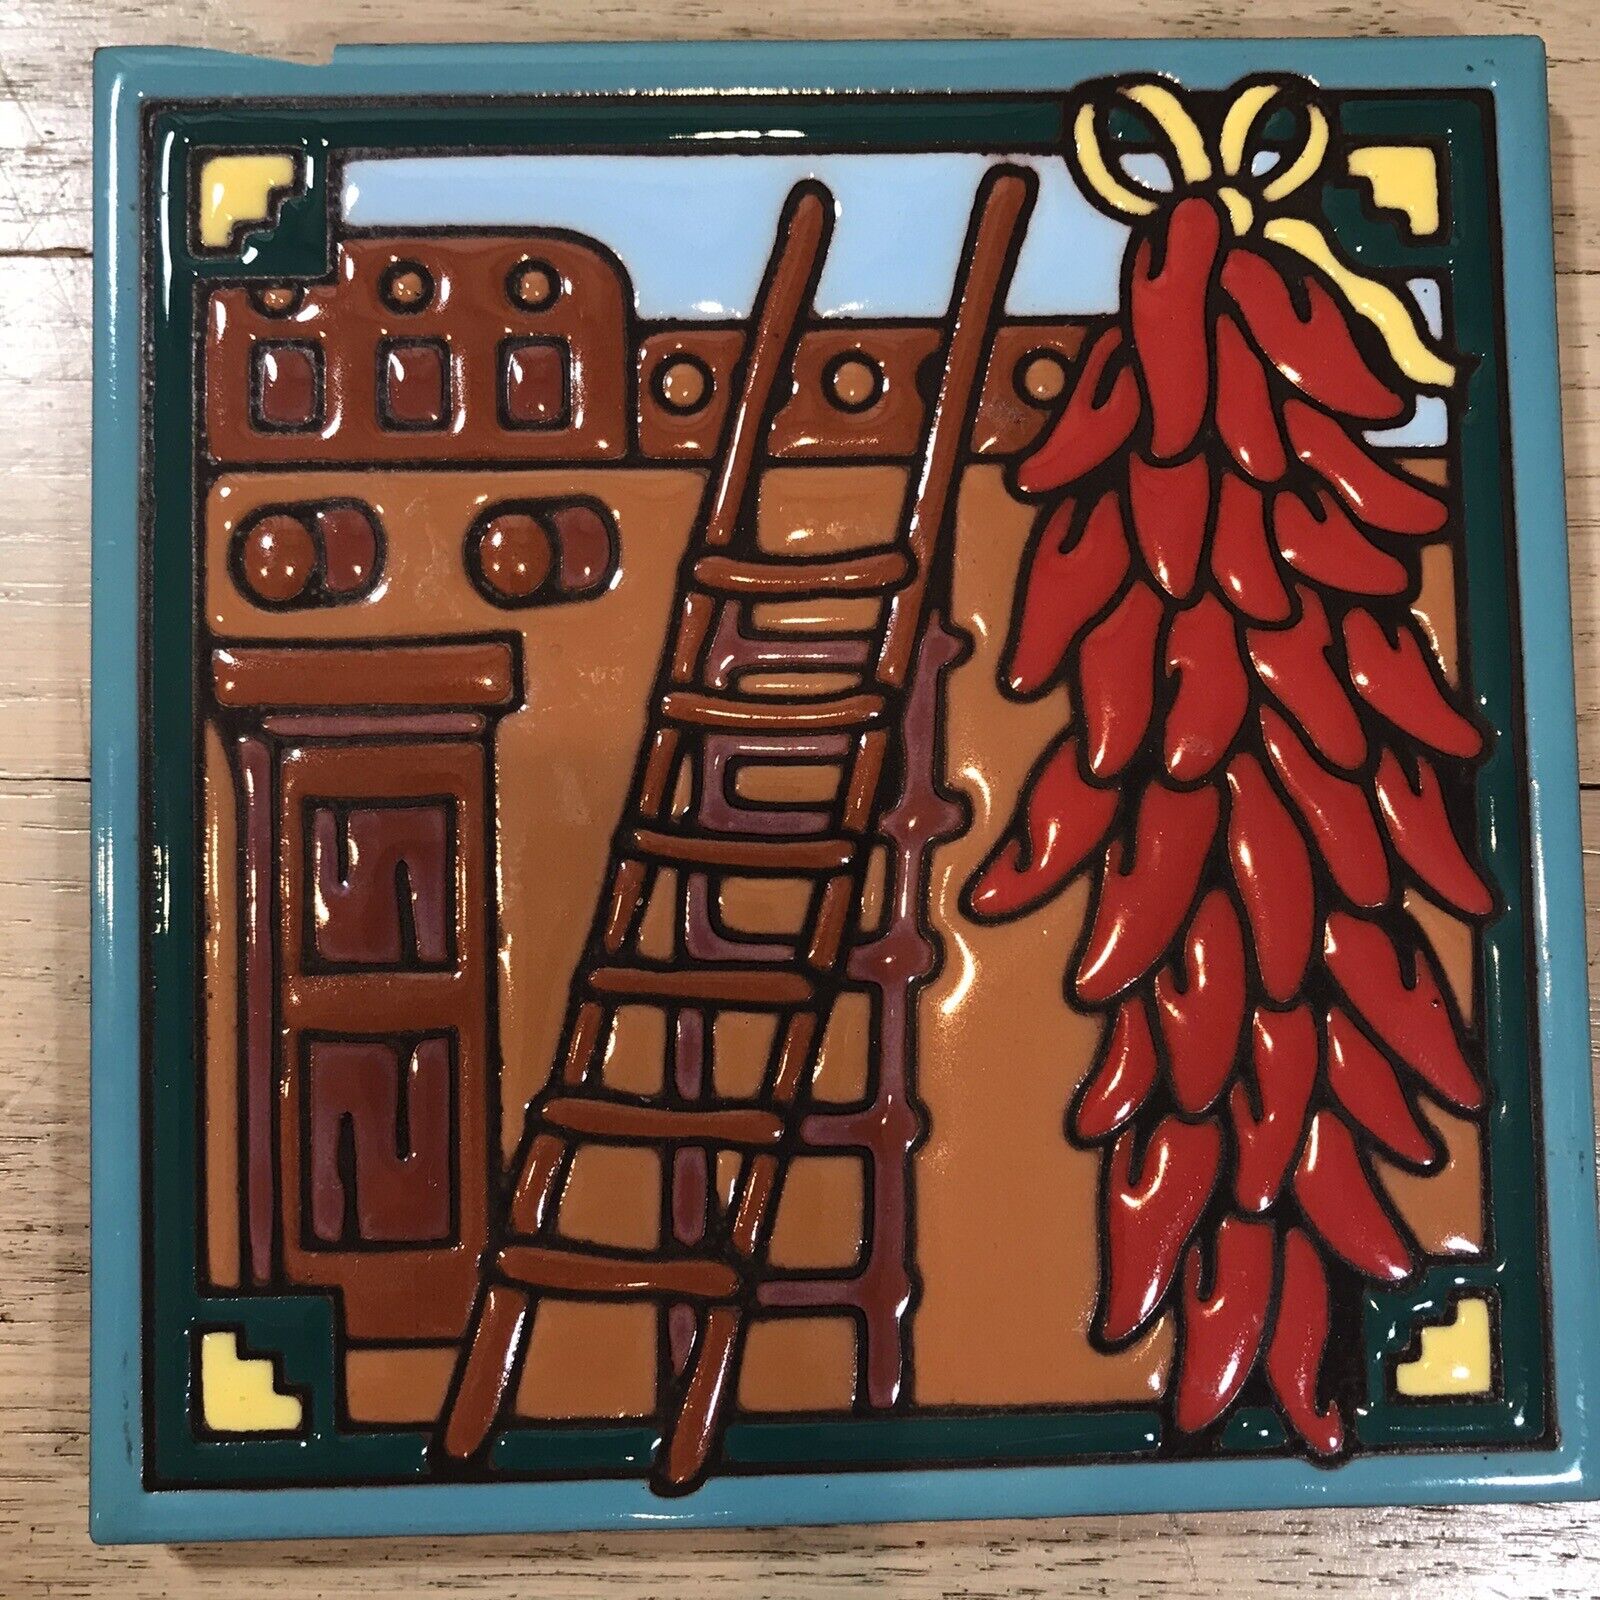 Earthtones Hand N Hand Designs Tile Chili Ristra with Pueblo 6x6\